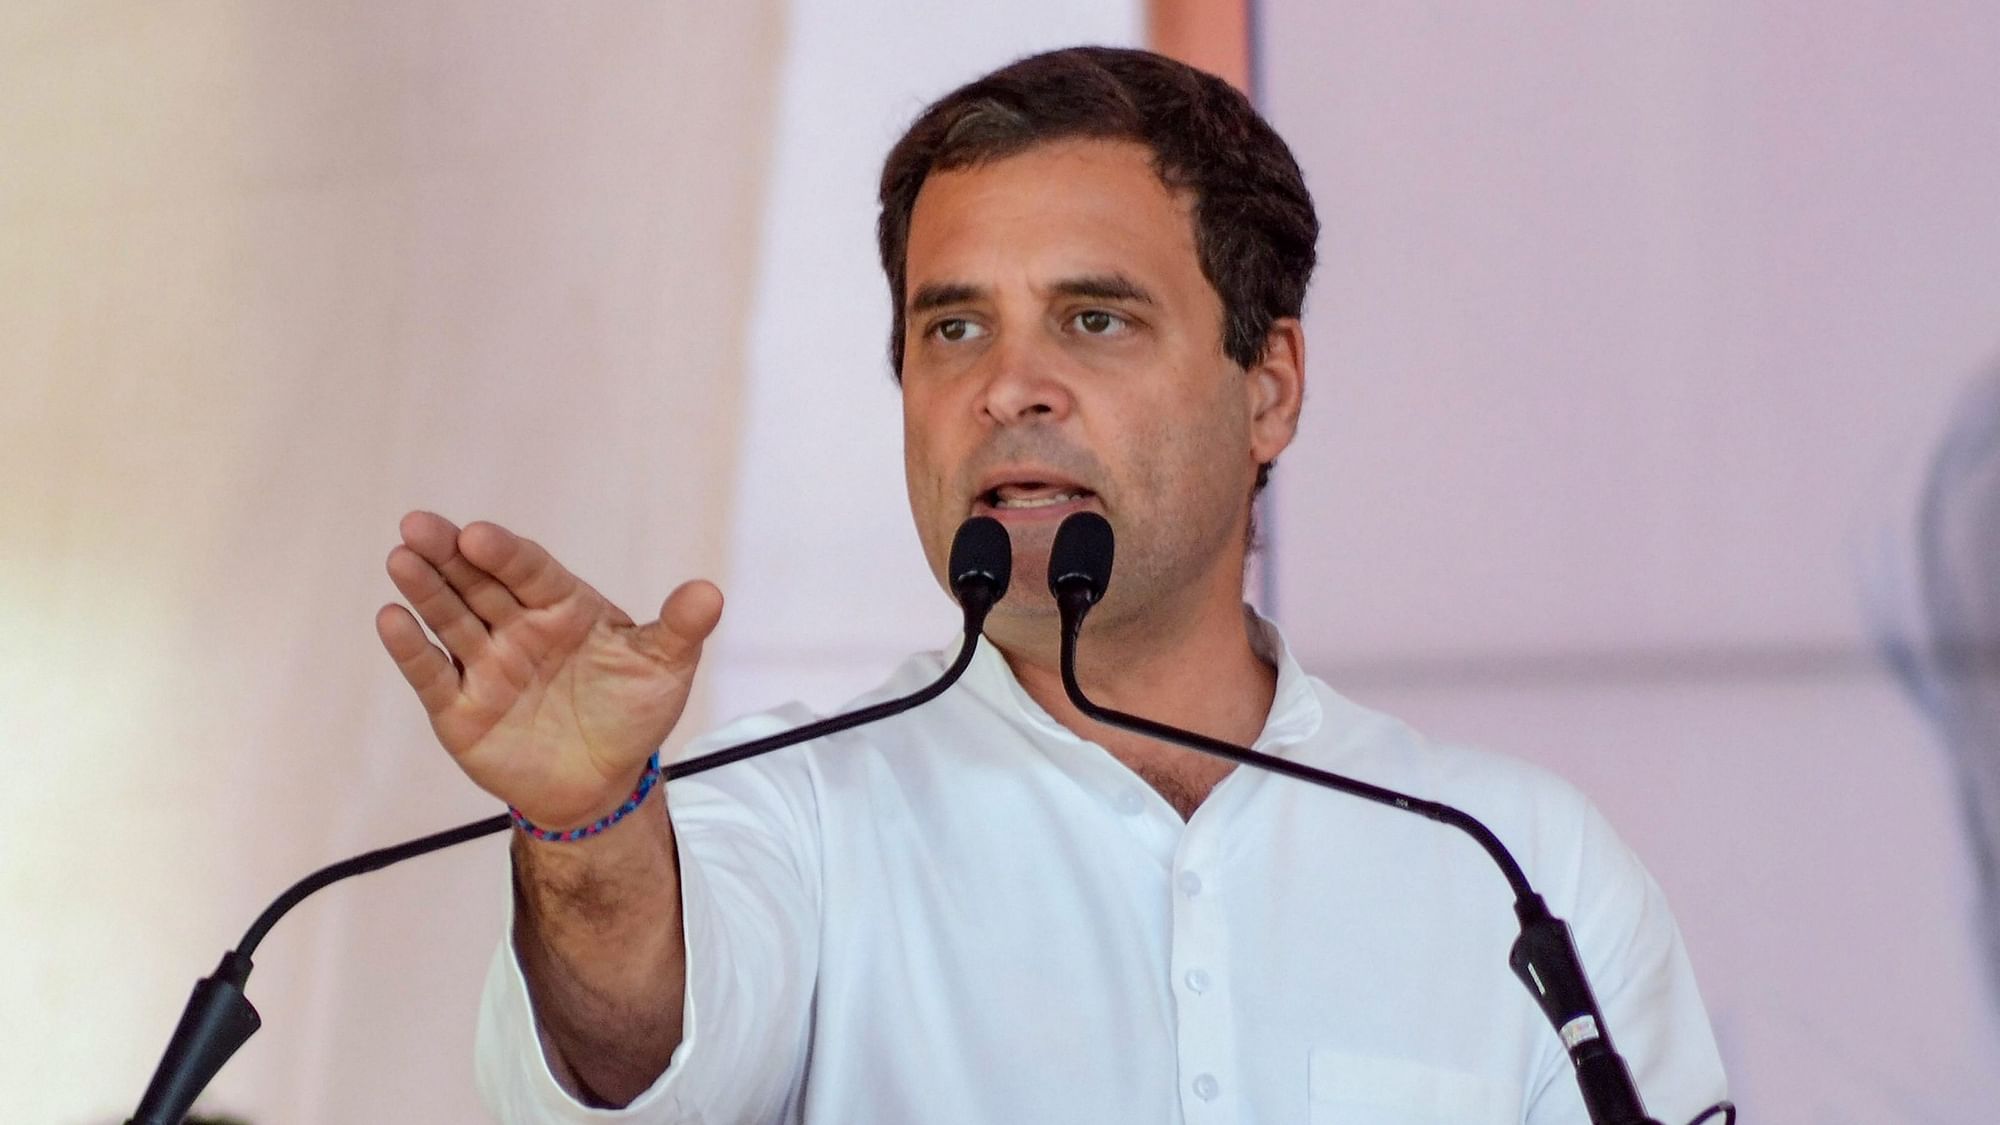 Congress President Rahul Gandhi addresses an election rally. (For representational purposes)